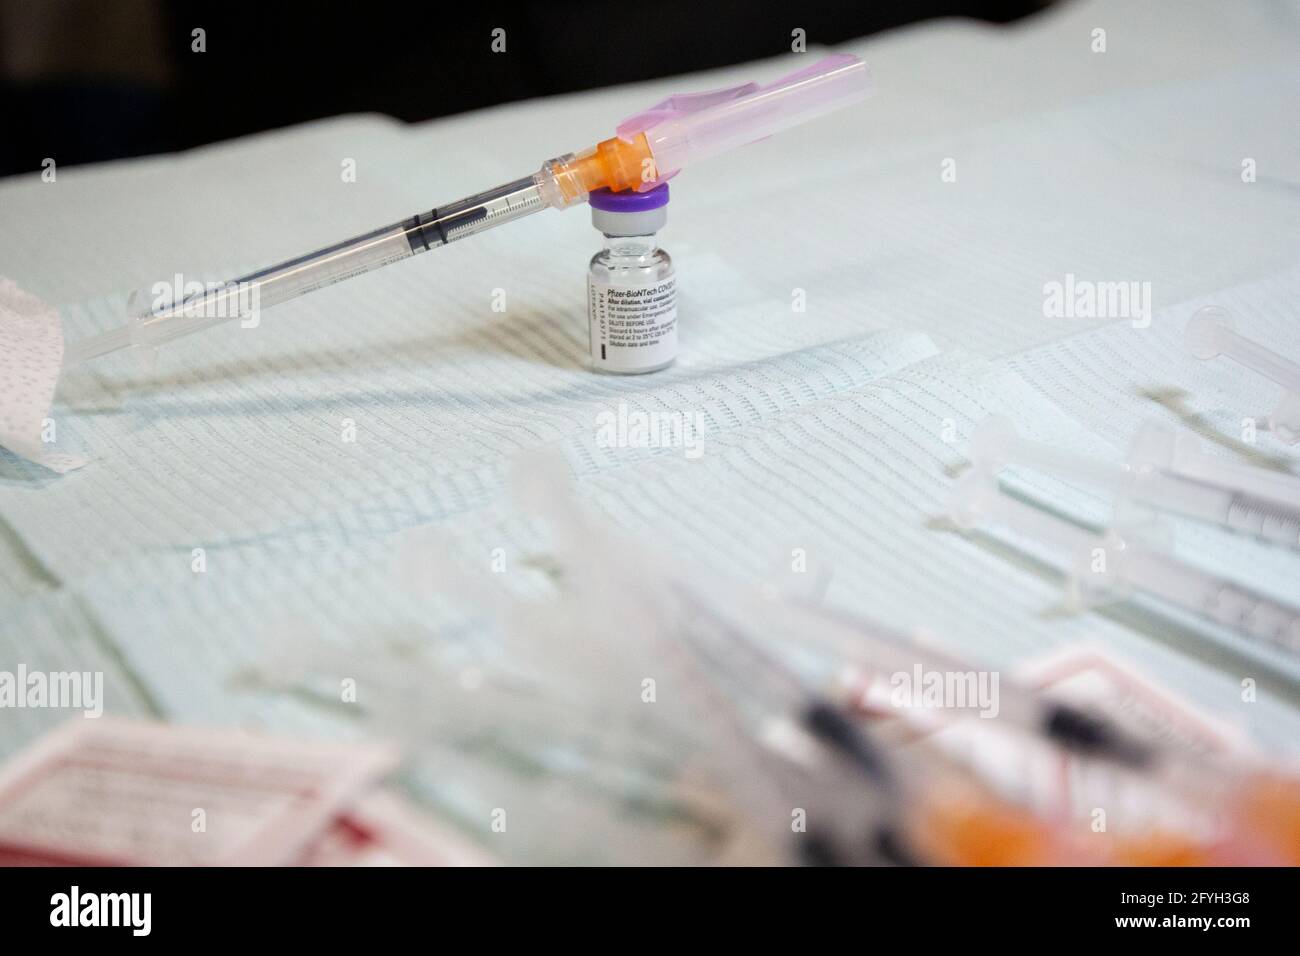 A vial and a syringe with the Pfizer-BioNTech COVID-19 vaccine in Napanee, Ontario on Monday, March 15, 2021, as the COVID-19 pandemic continues acros Stock Photo